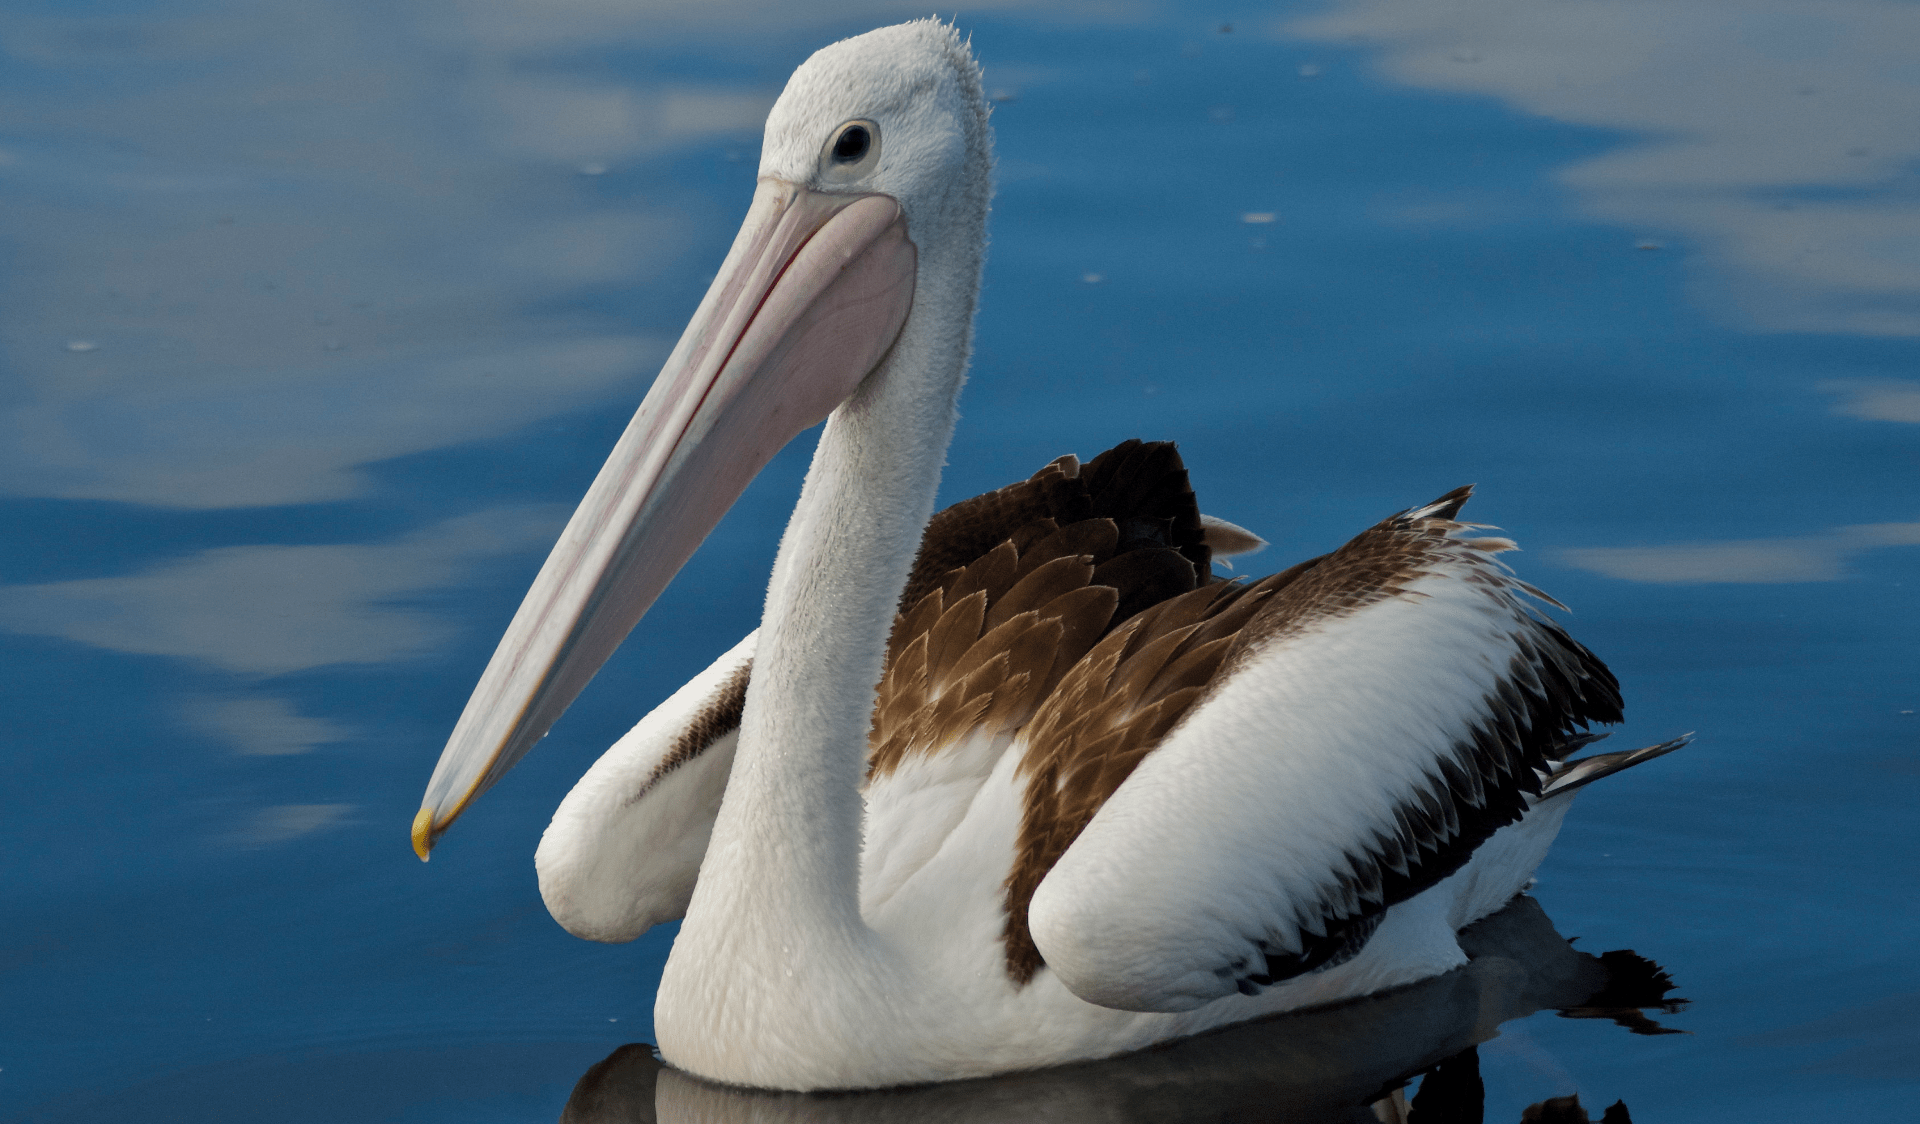 A pelican sits on the water